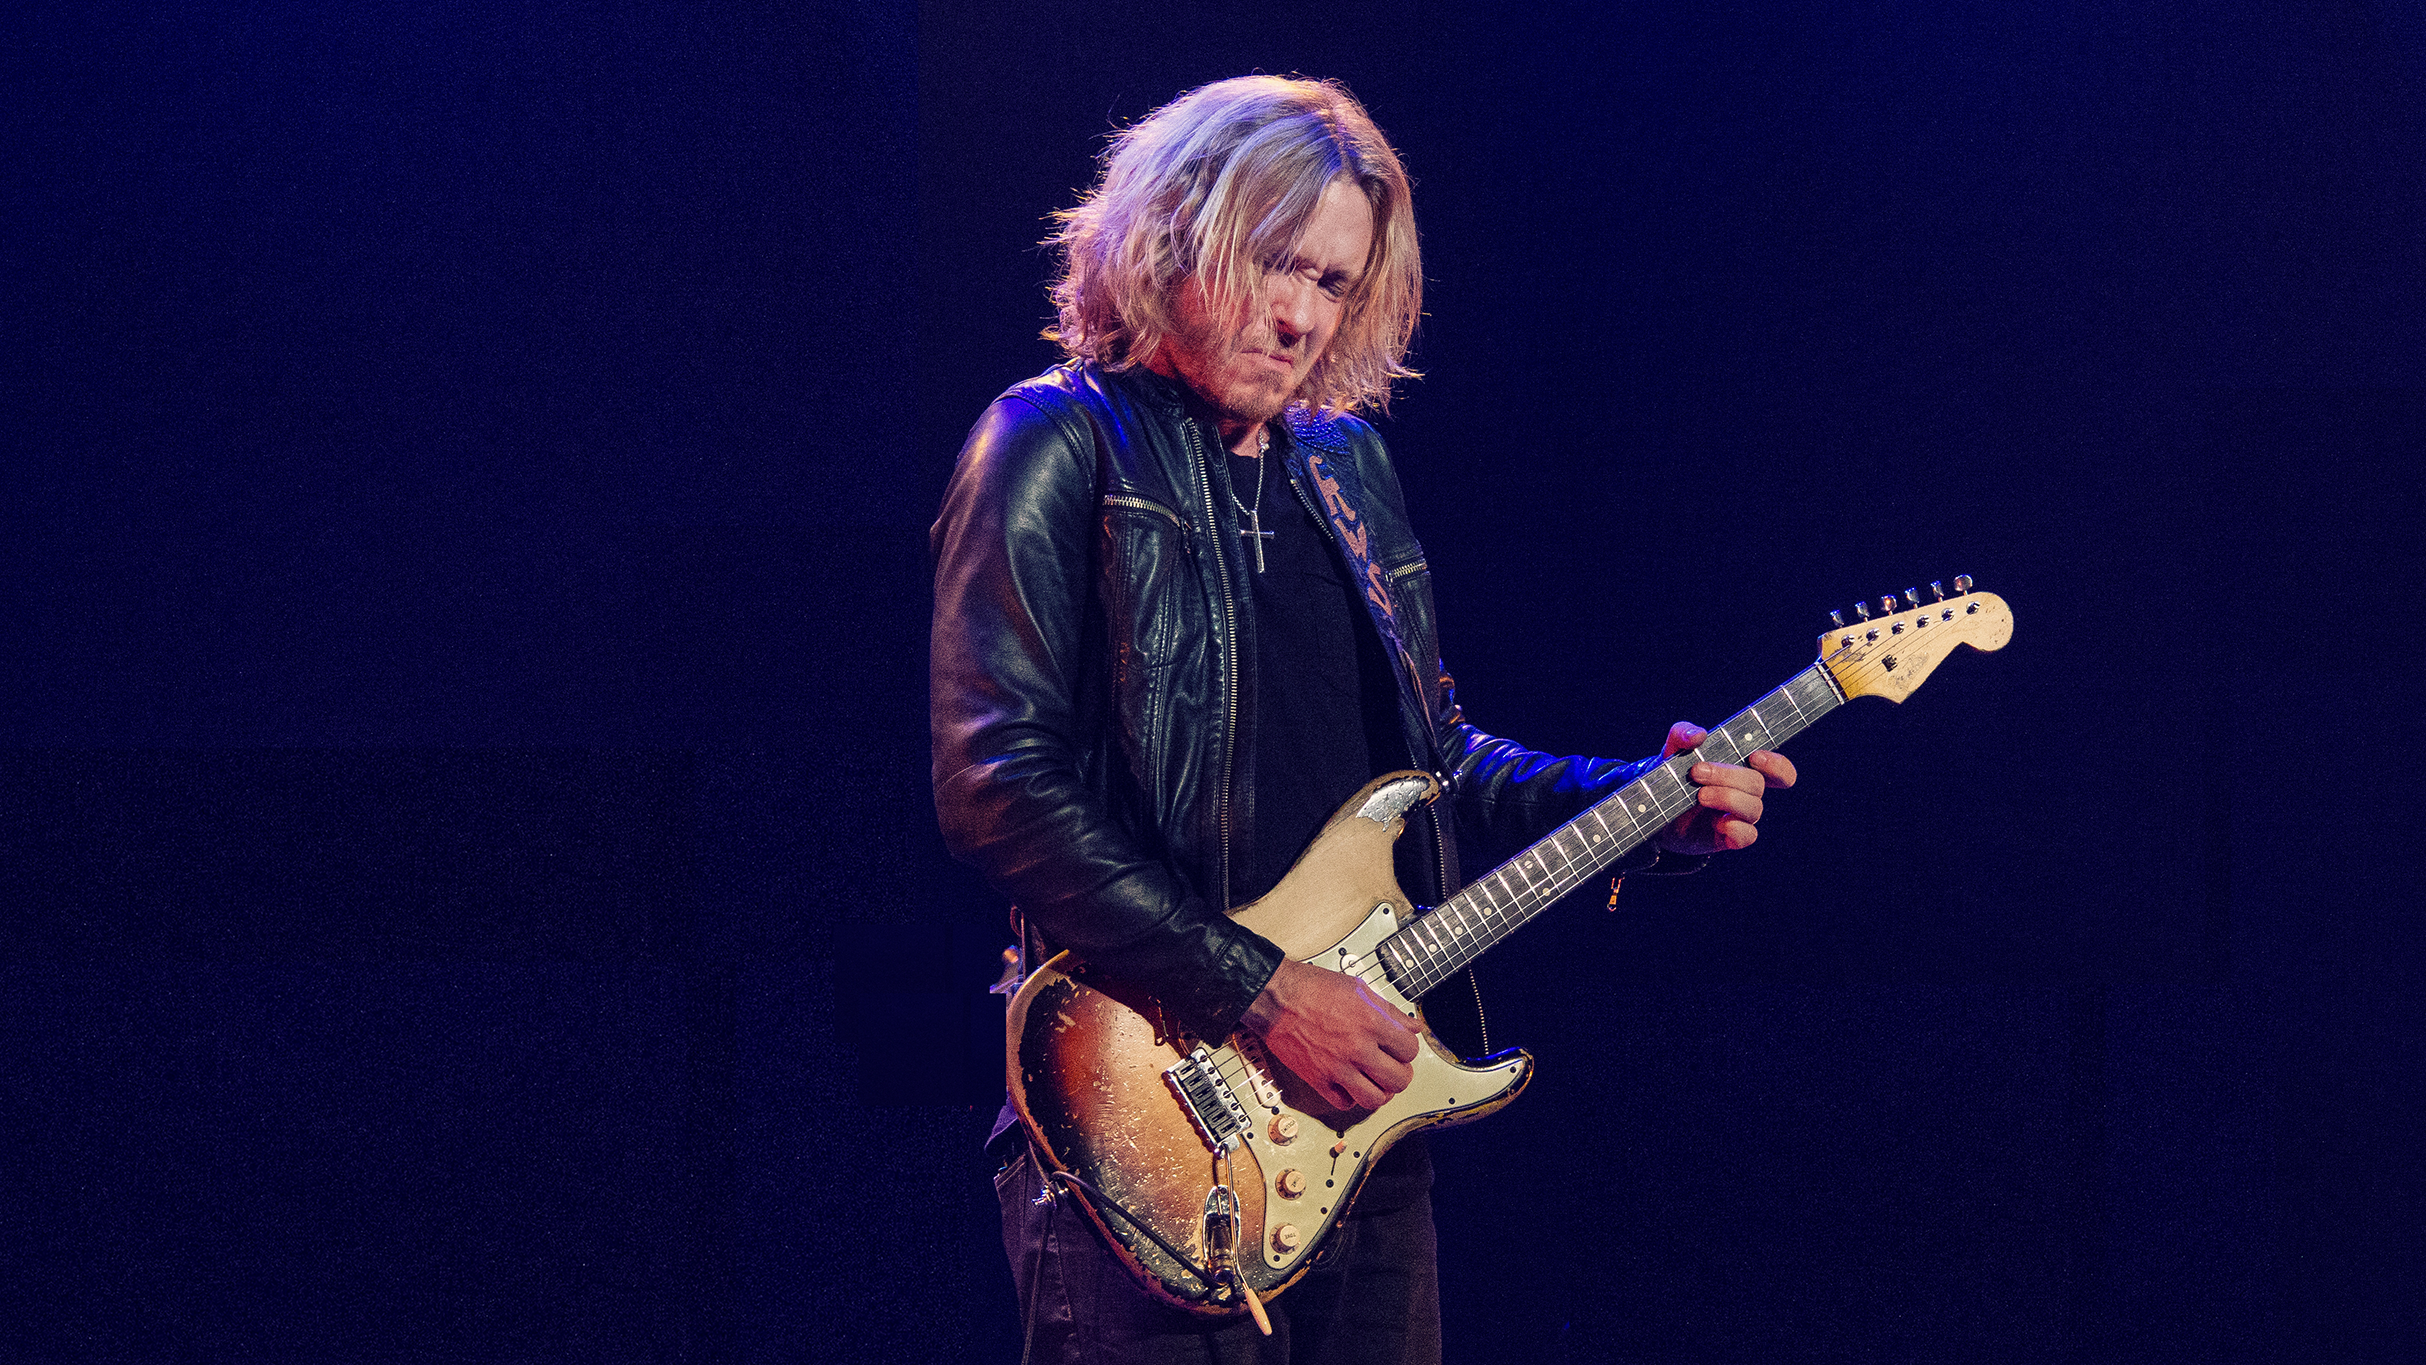 An Evening with The Kenny Wayne Shepherd Band